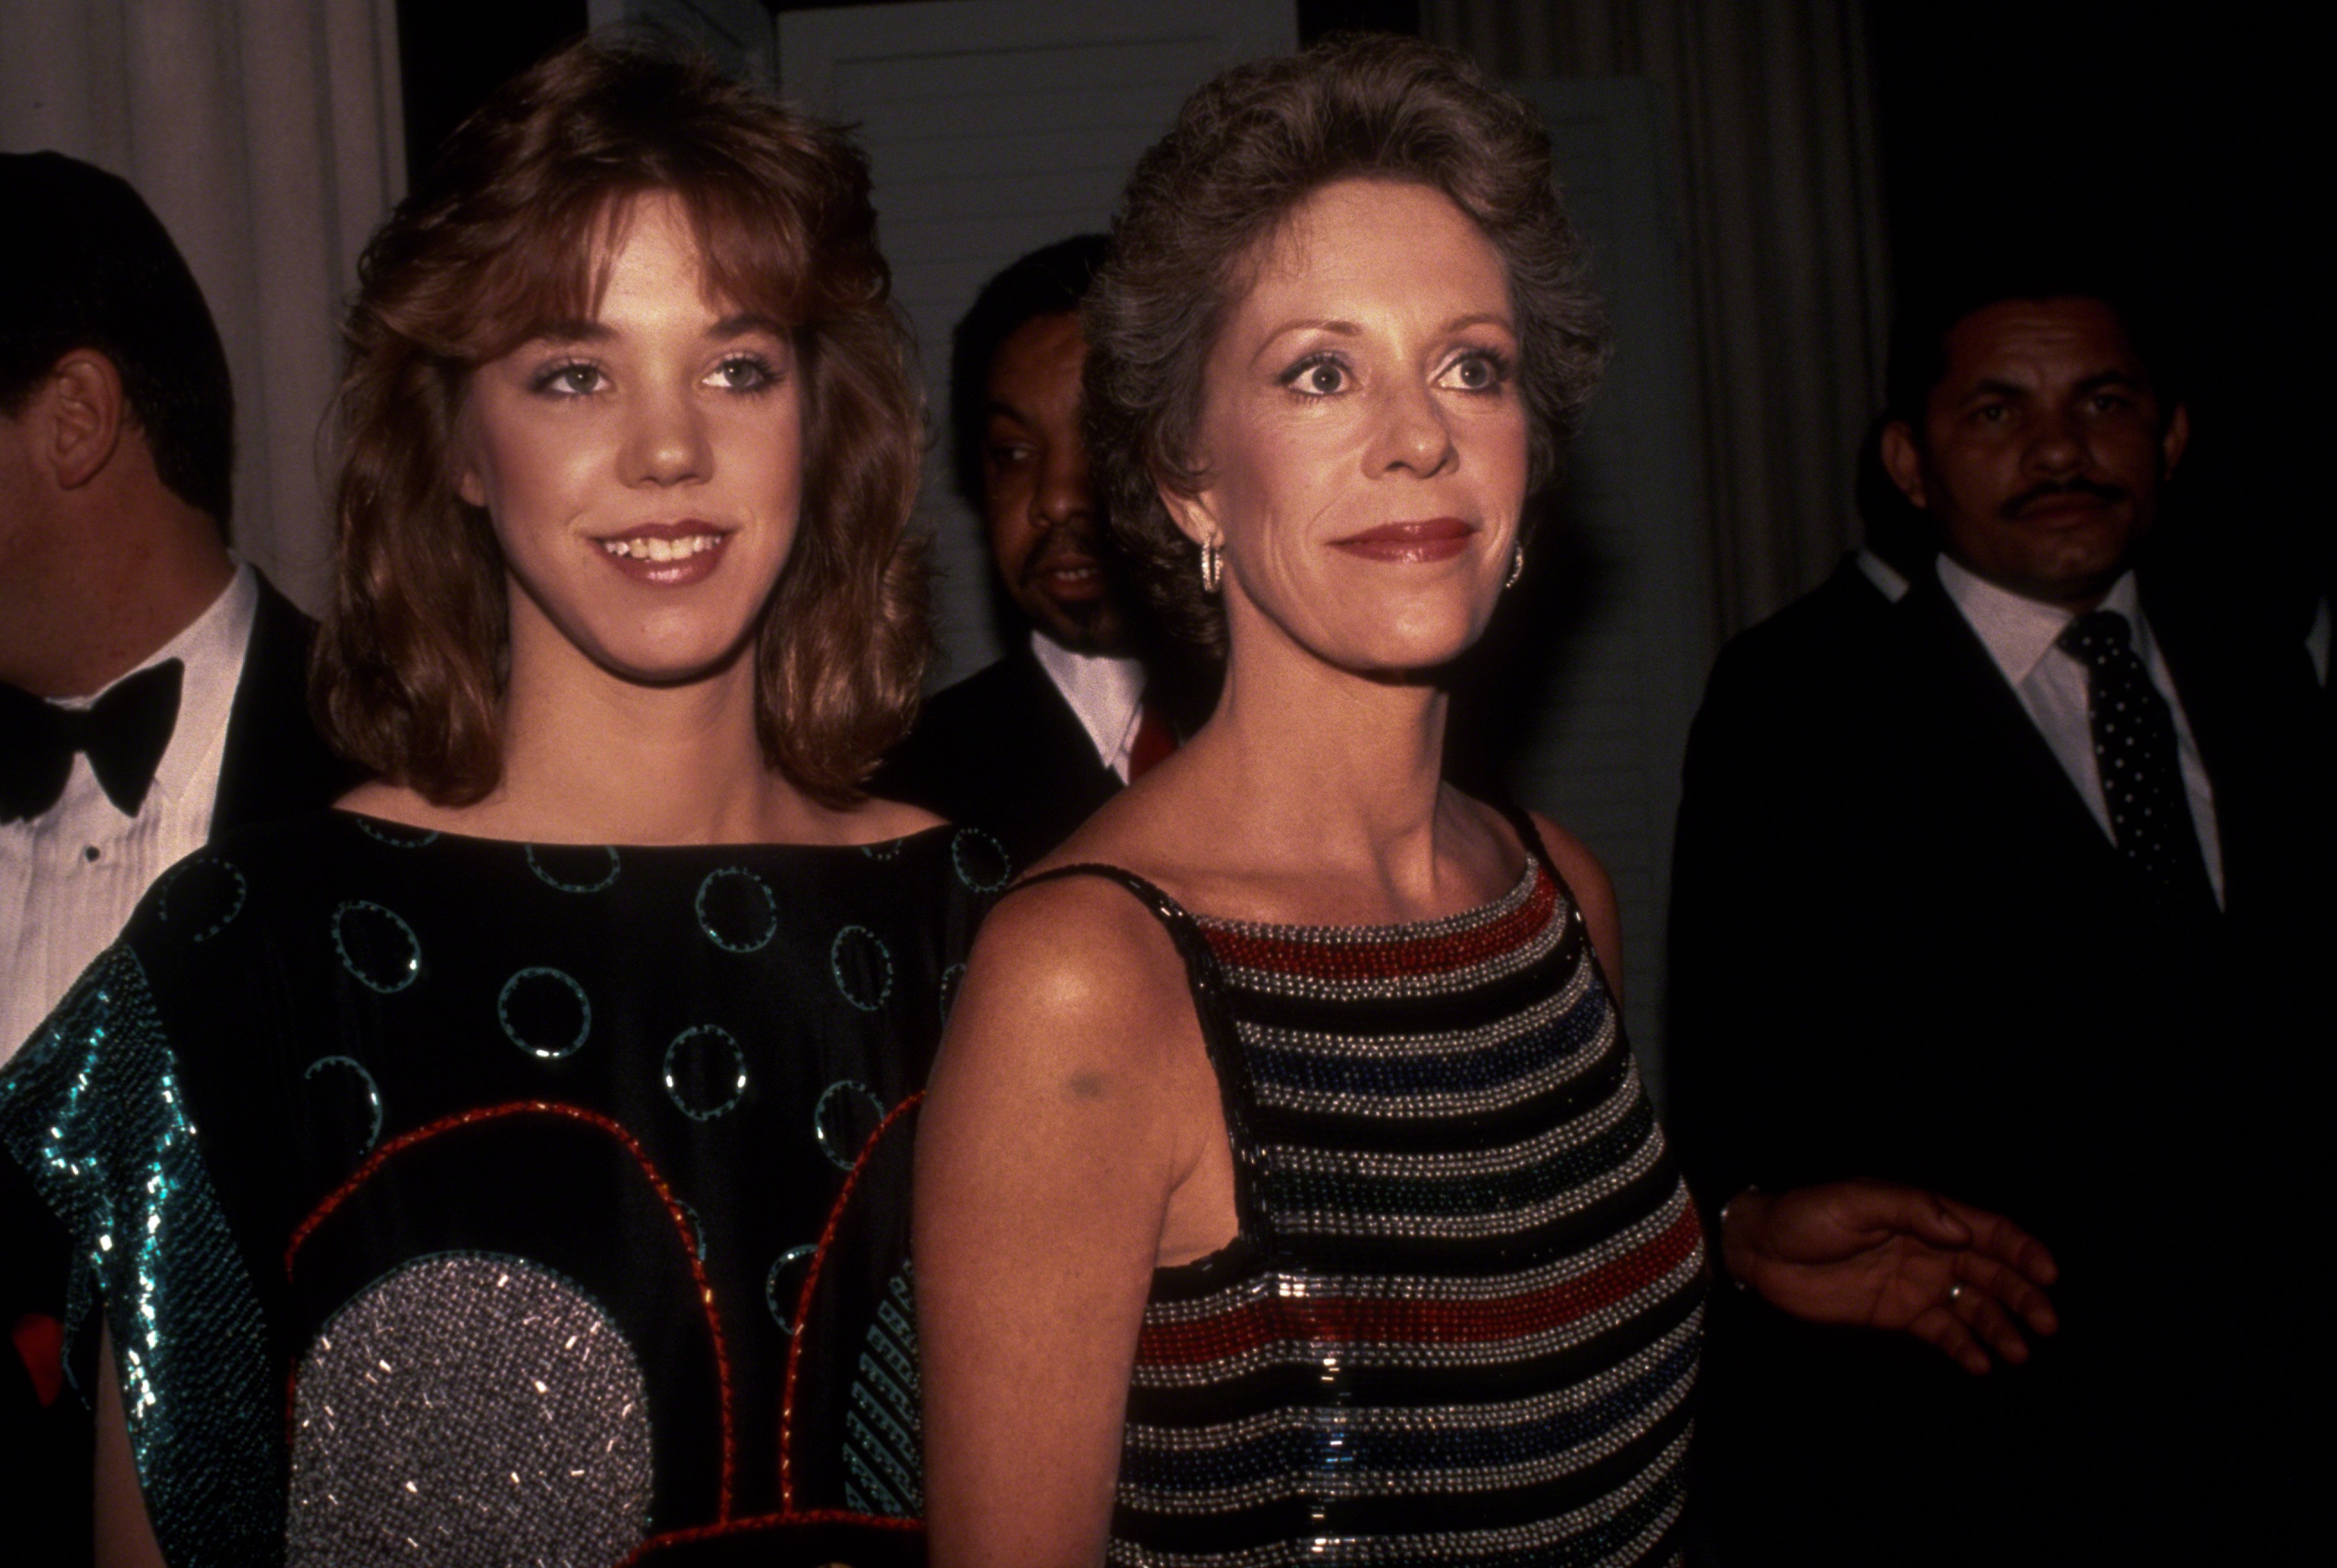 Actress Carol Burnett with her daughter Carrie Hamilton in 1983 in New York City | Photo: Getty Images